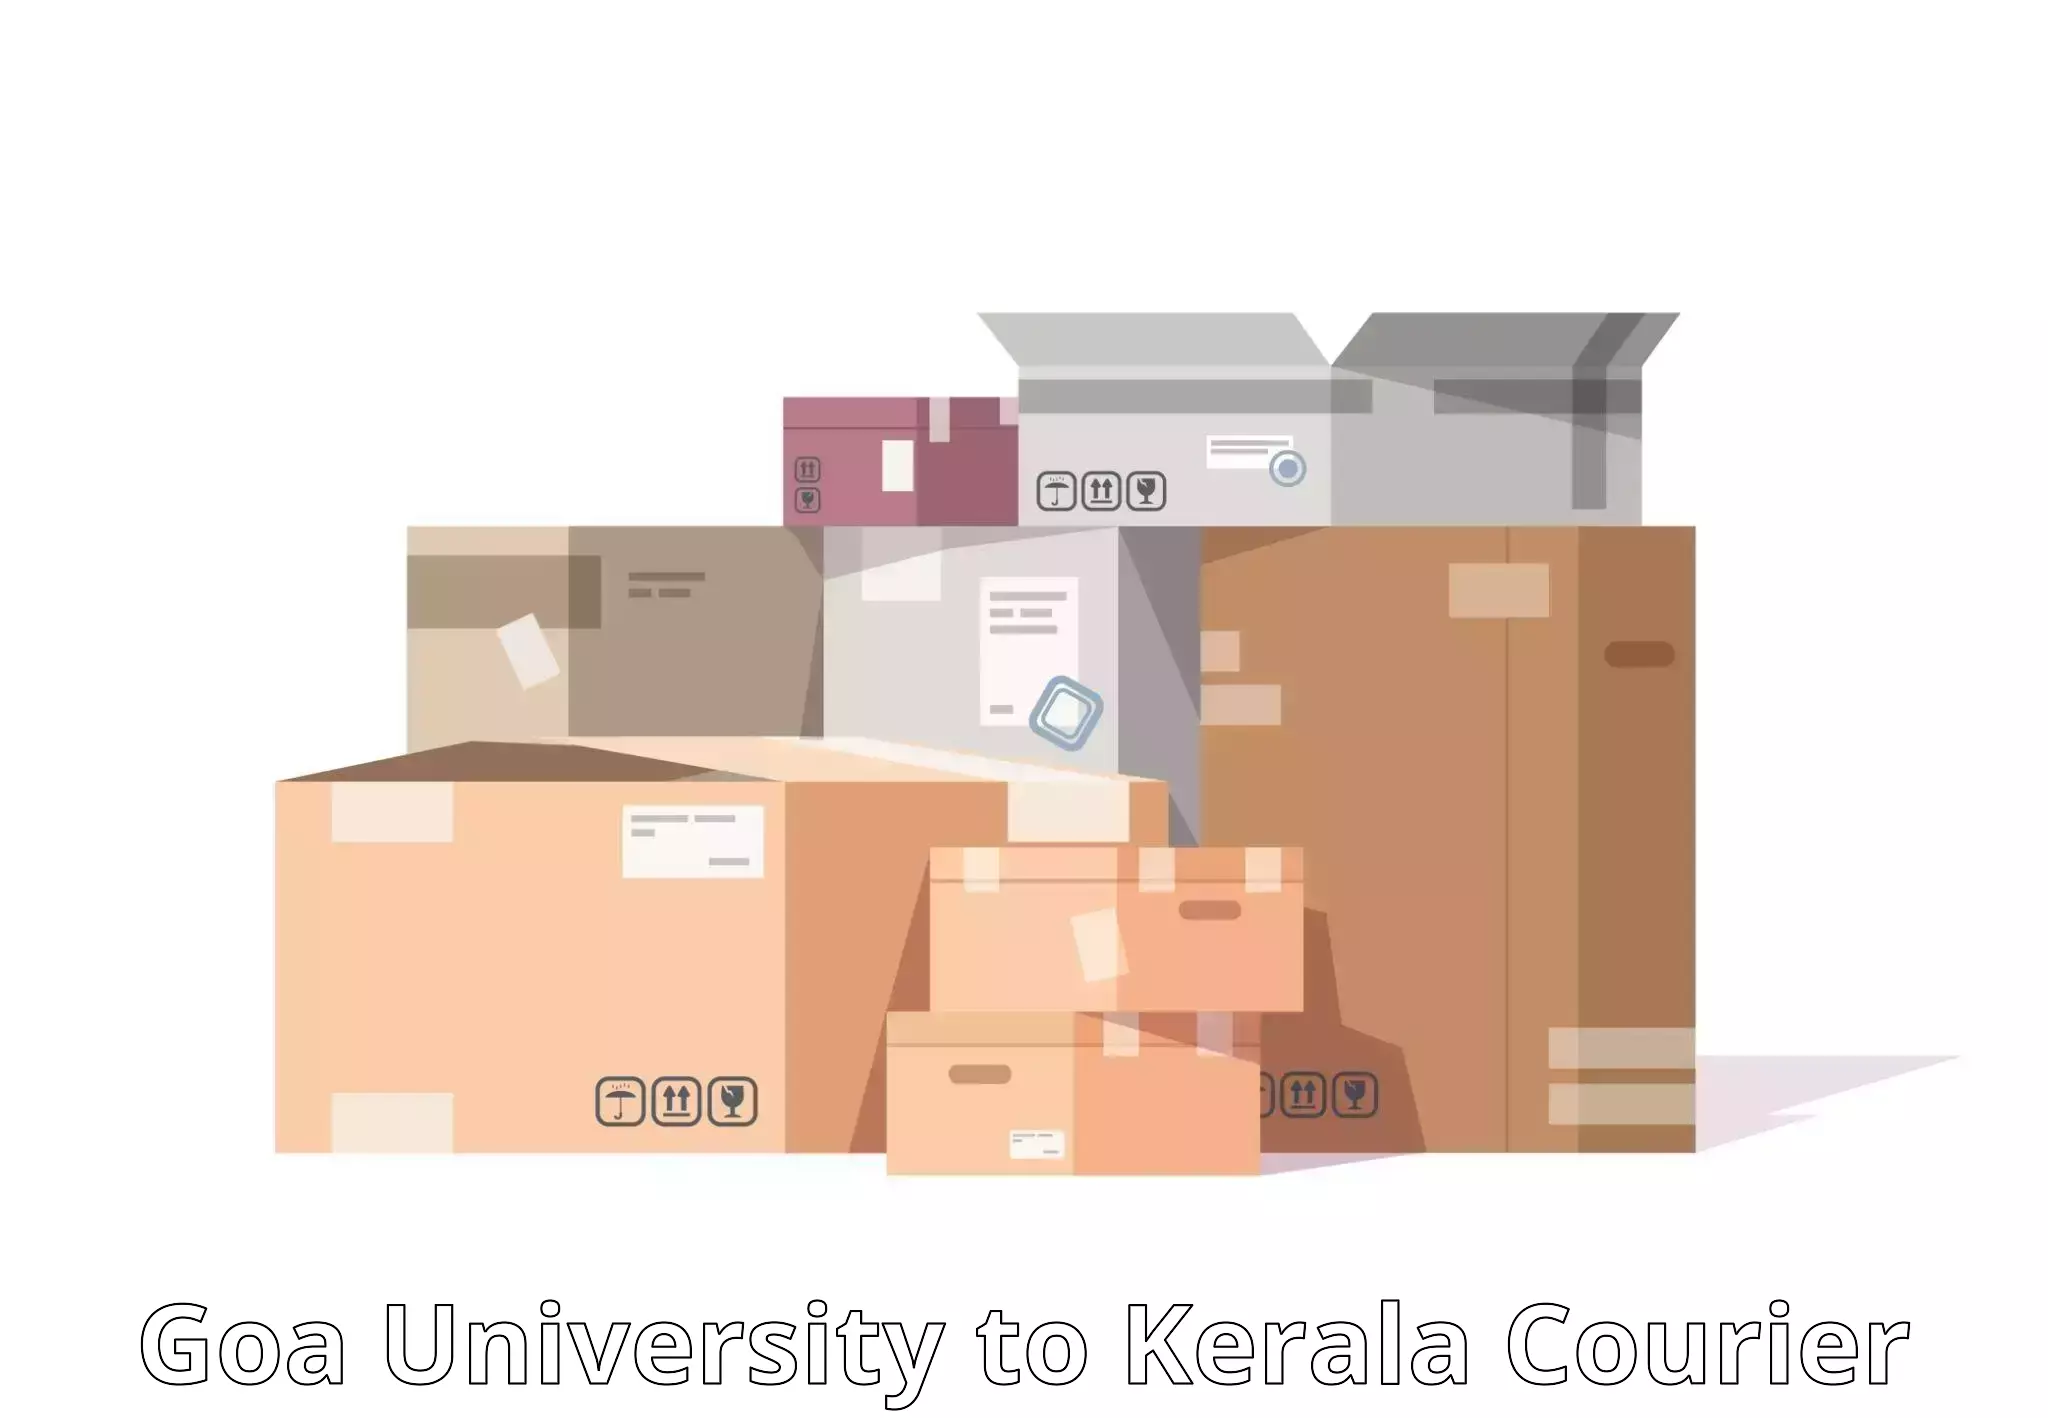 End-to-end delivery Goa University to Calicut